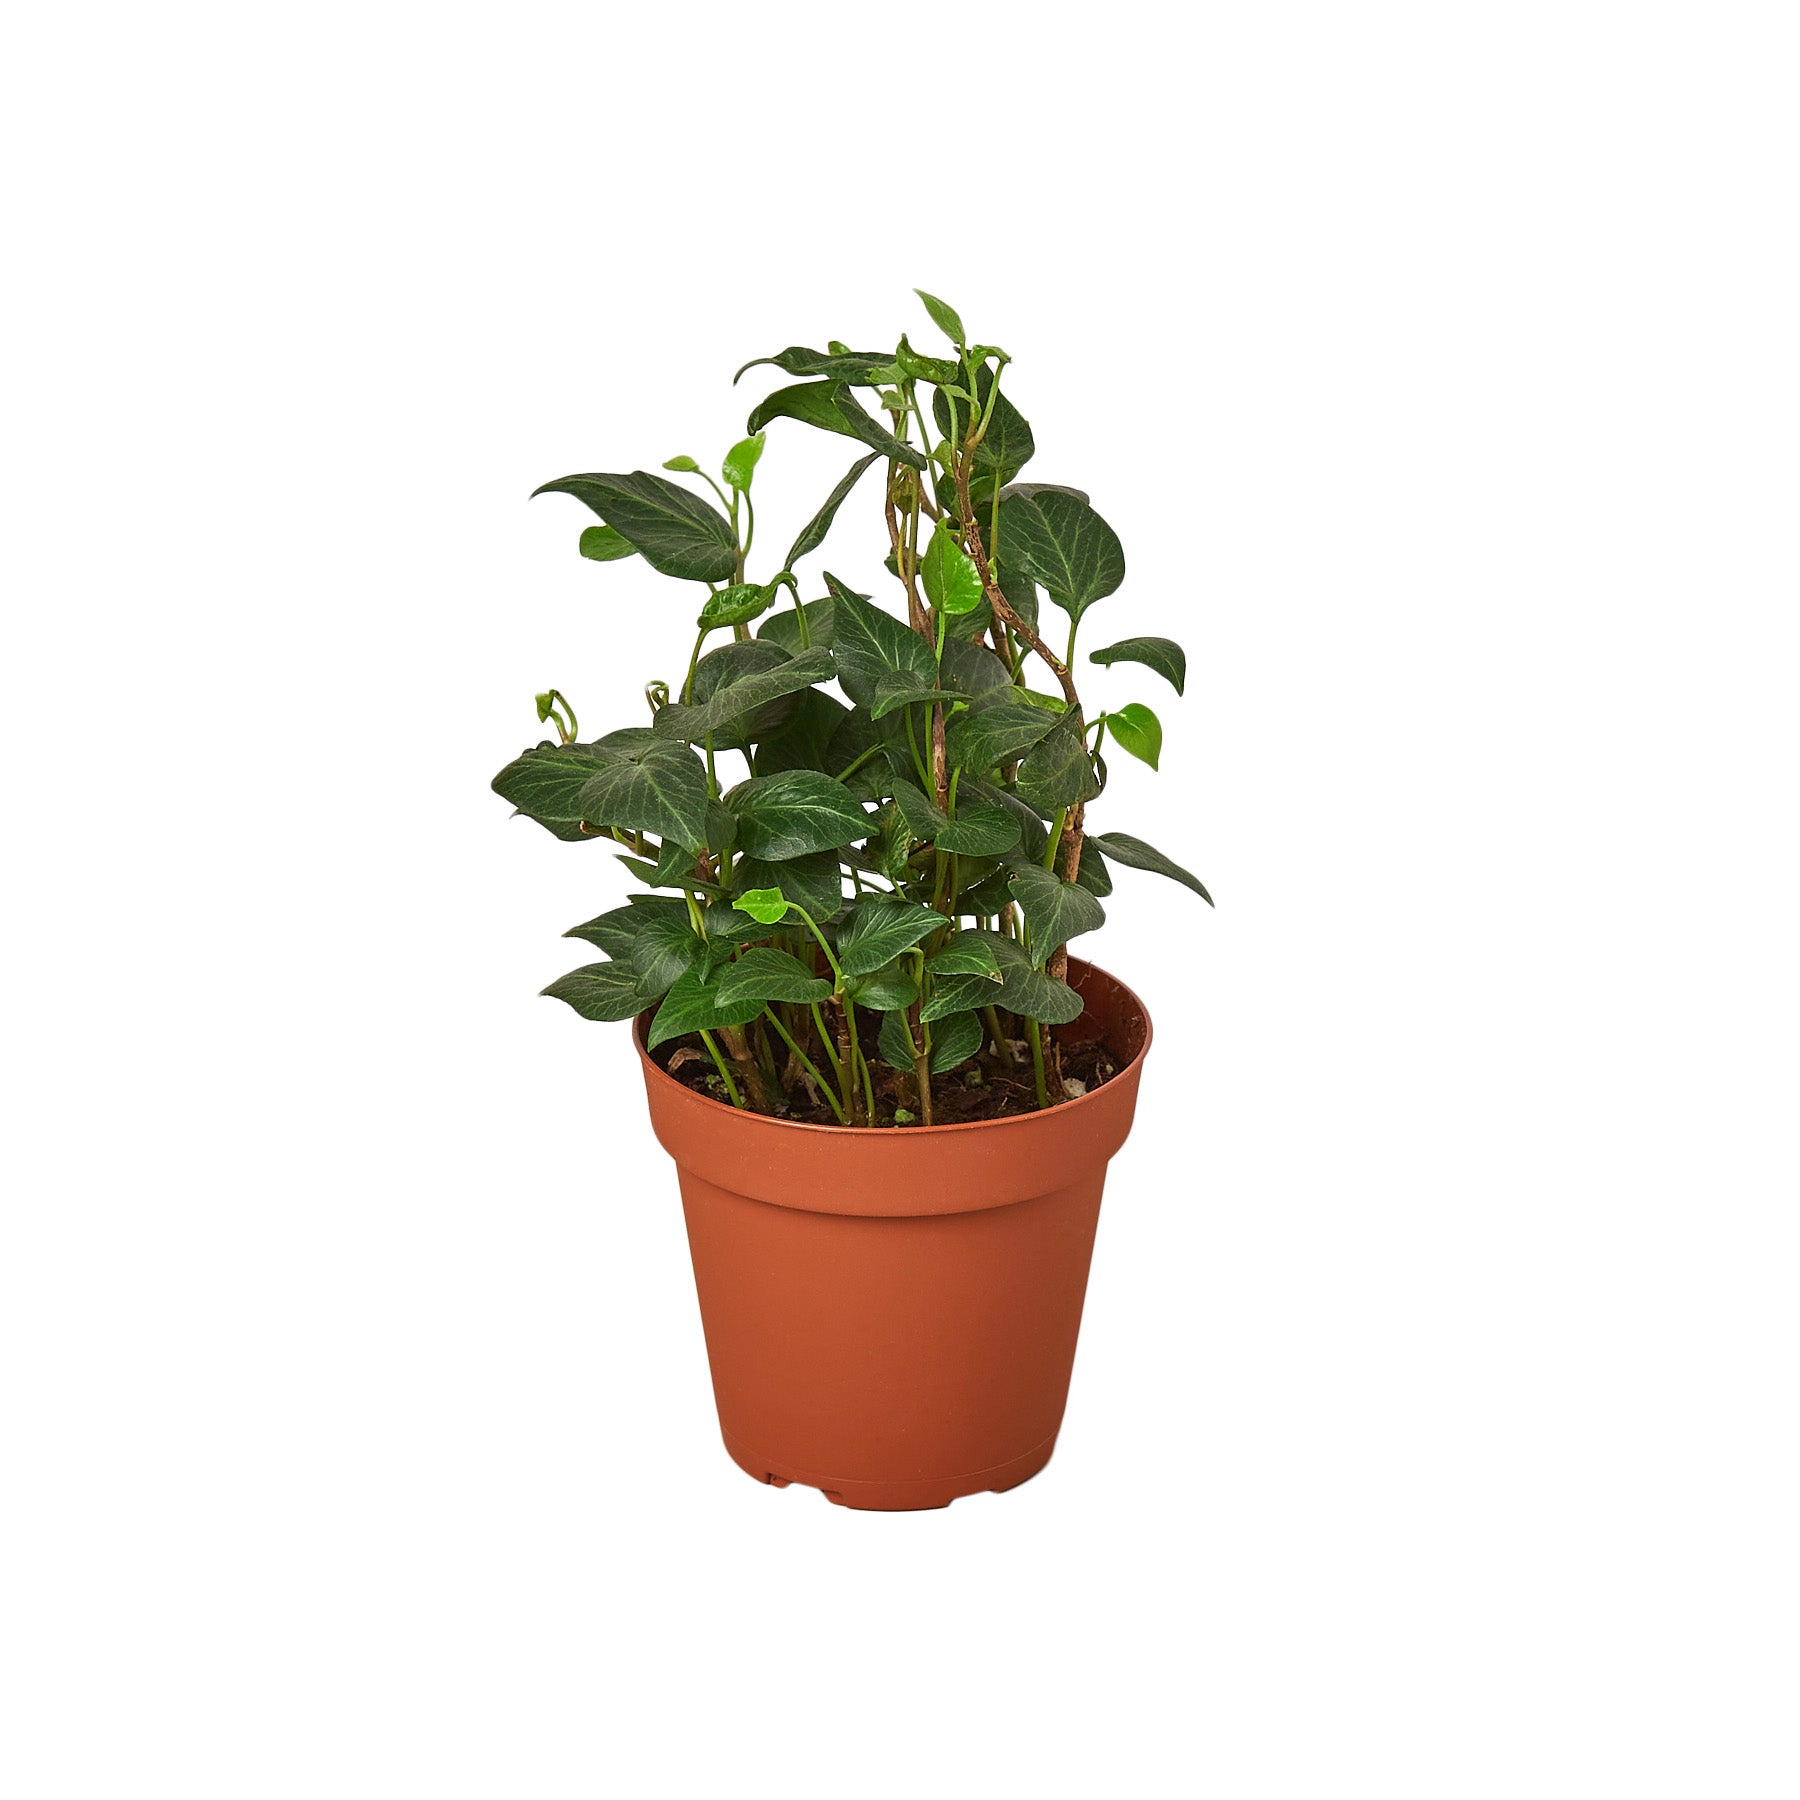 A small plant in a pot on a white background, perfect for the best garden nursery near me.